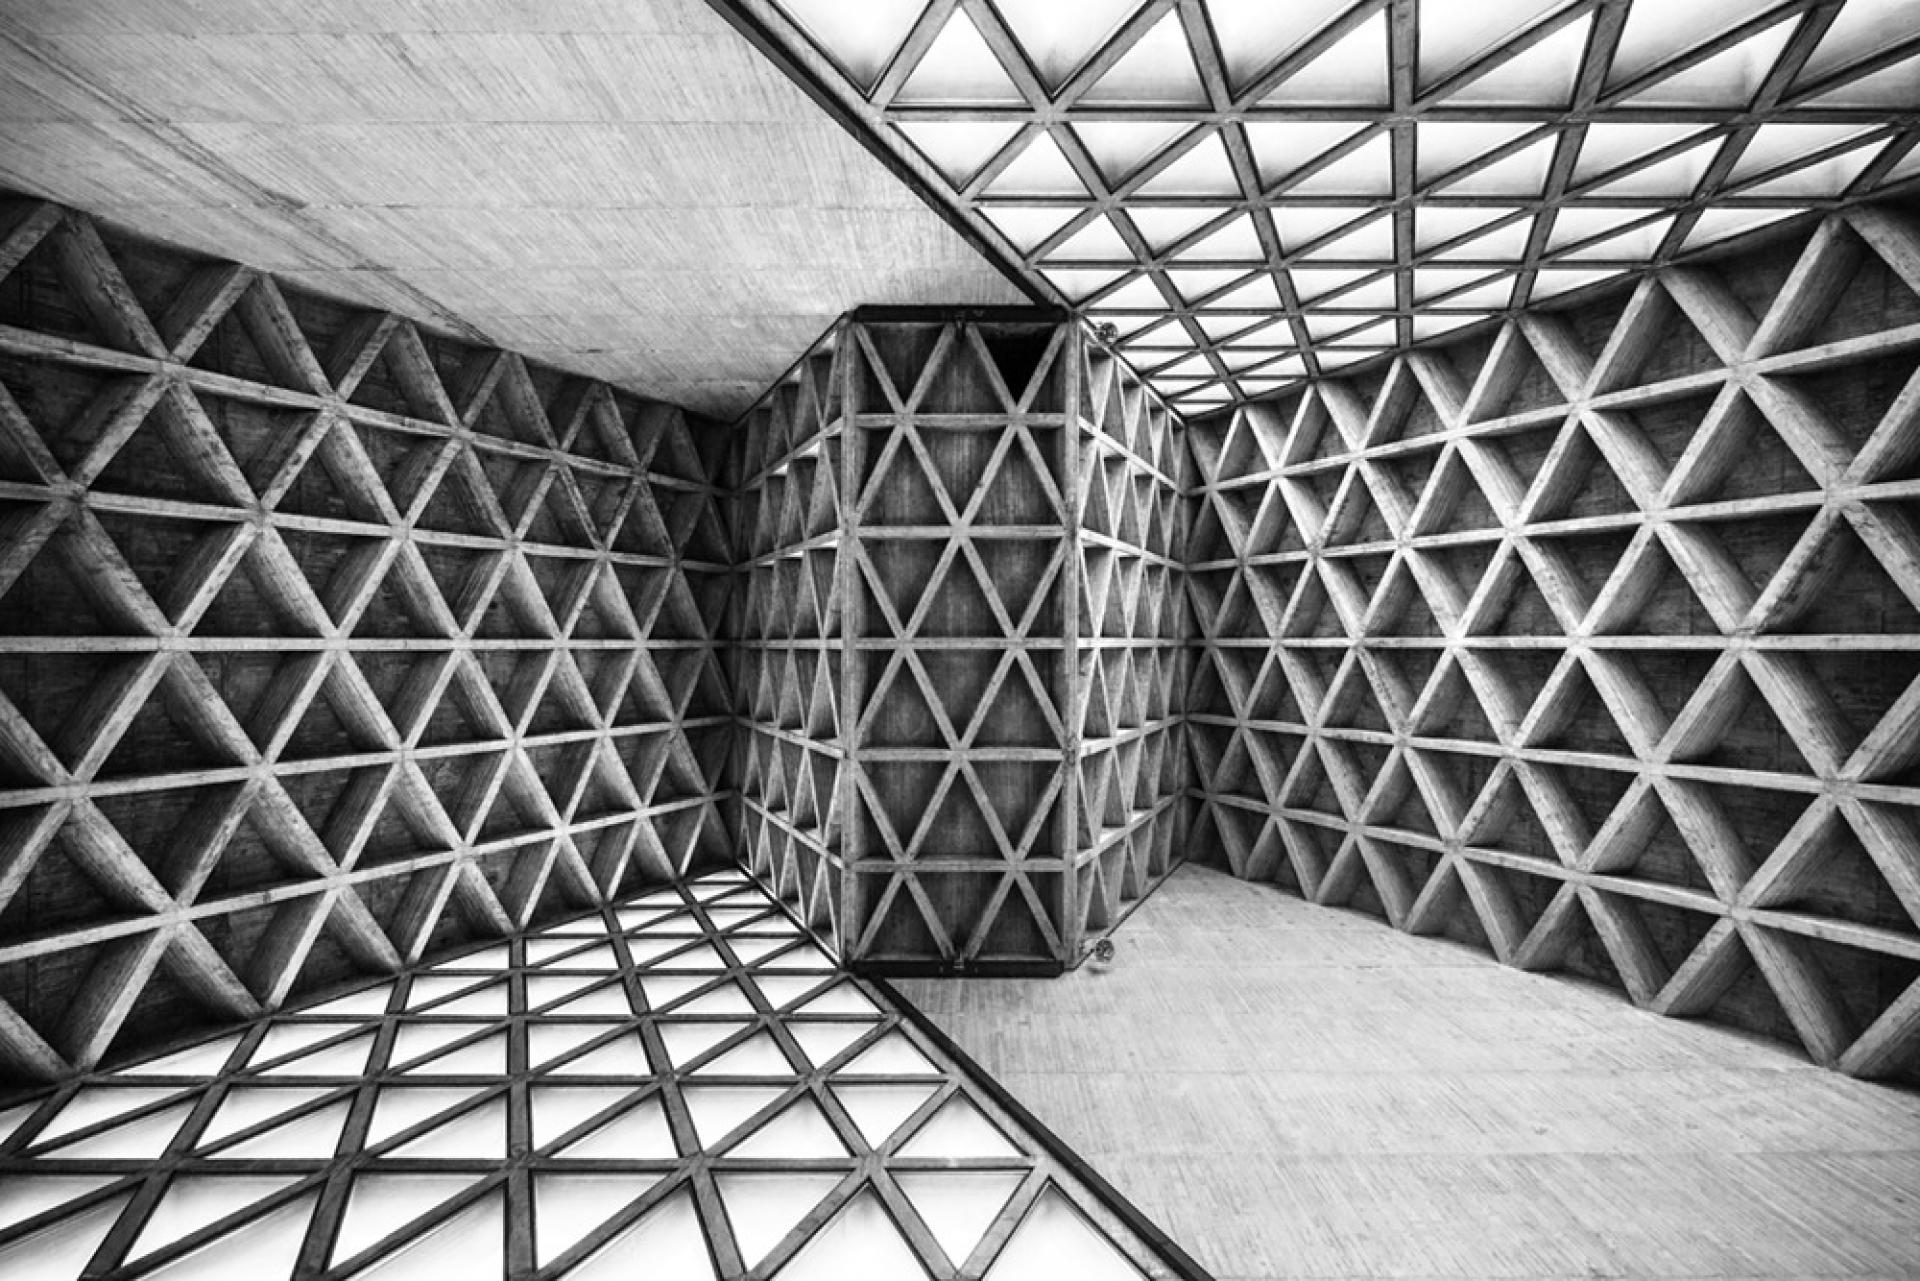 Concrete M structure of the interior of the Temple of Monte Grisa. | Photo by Roberto Conte